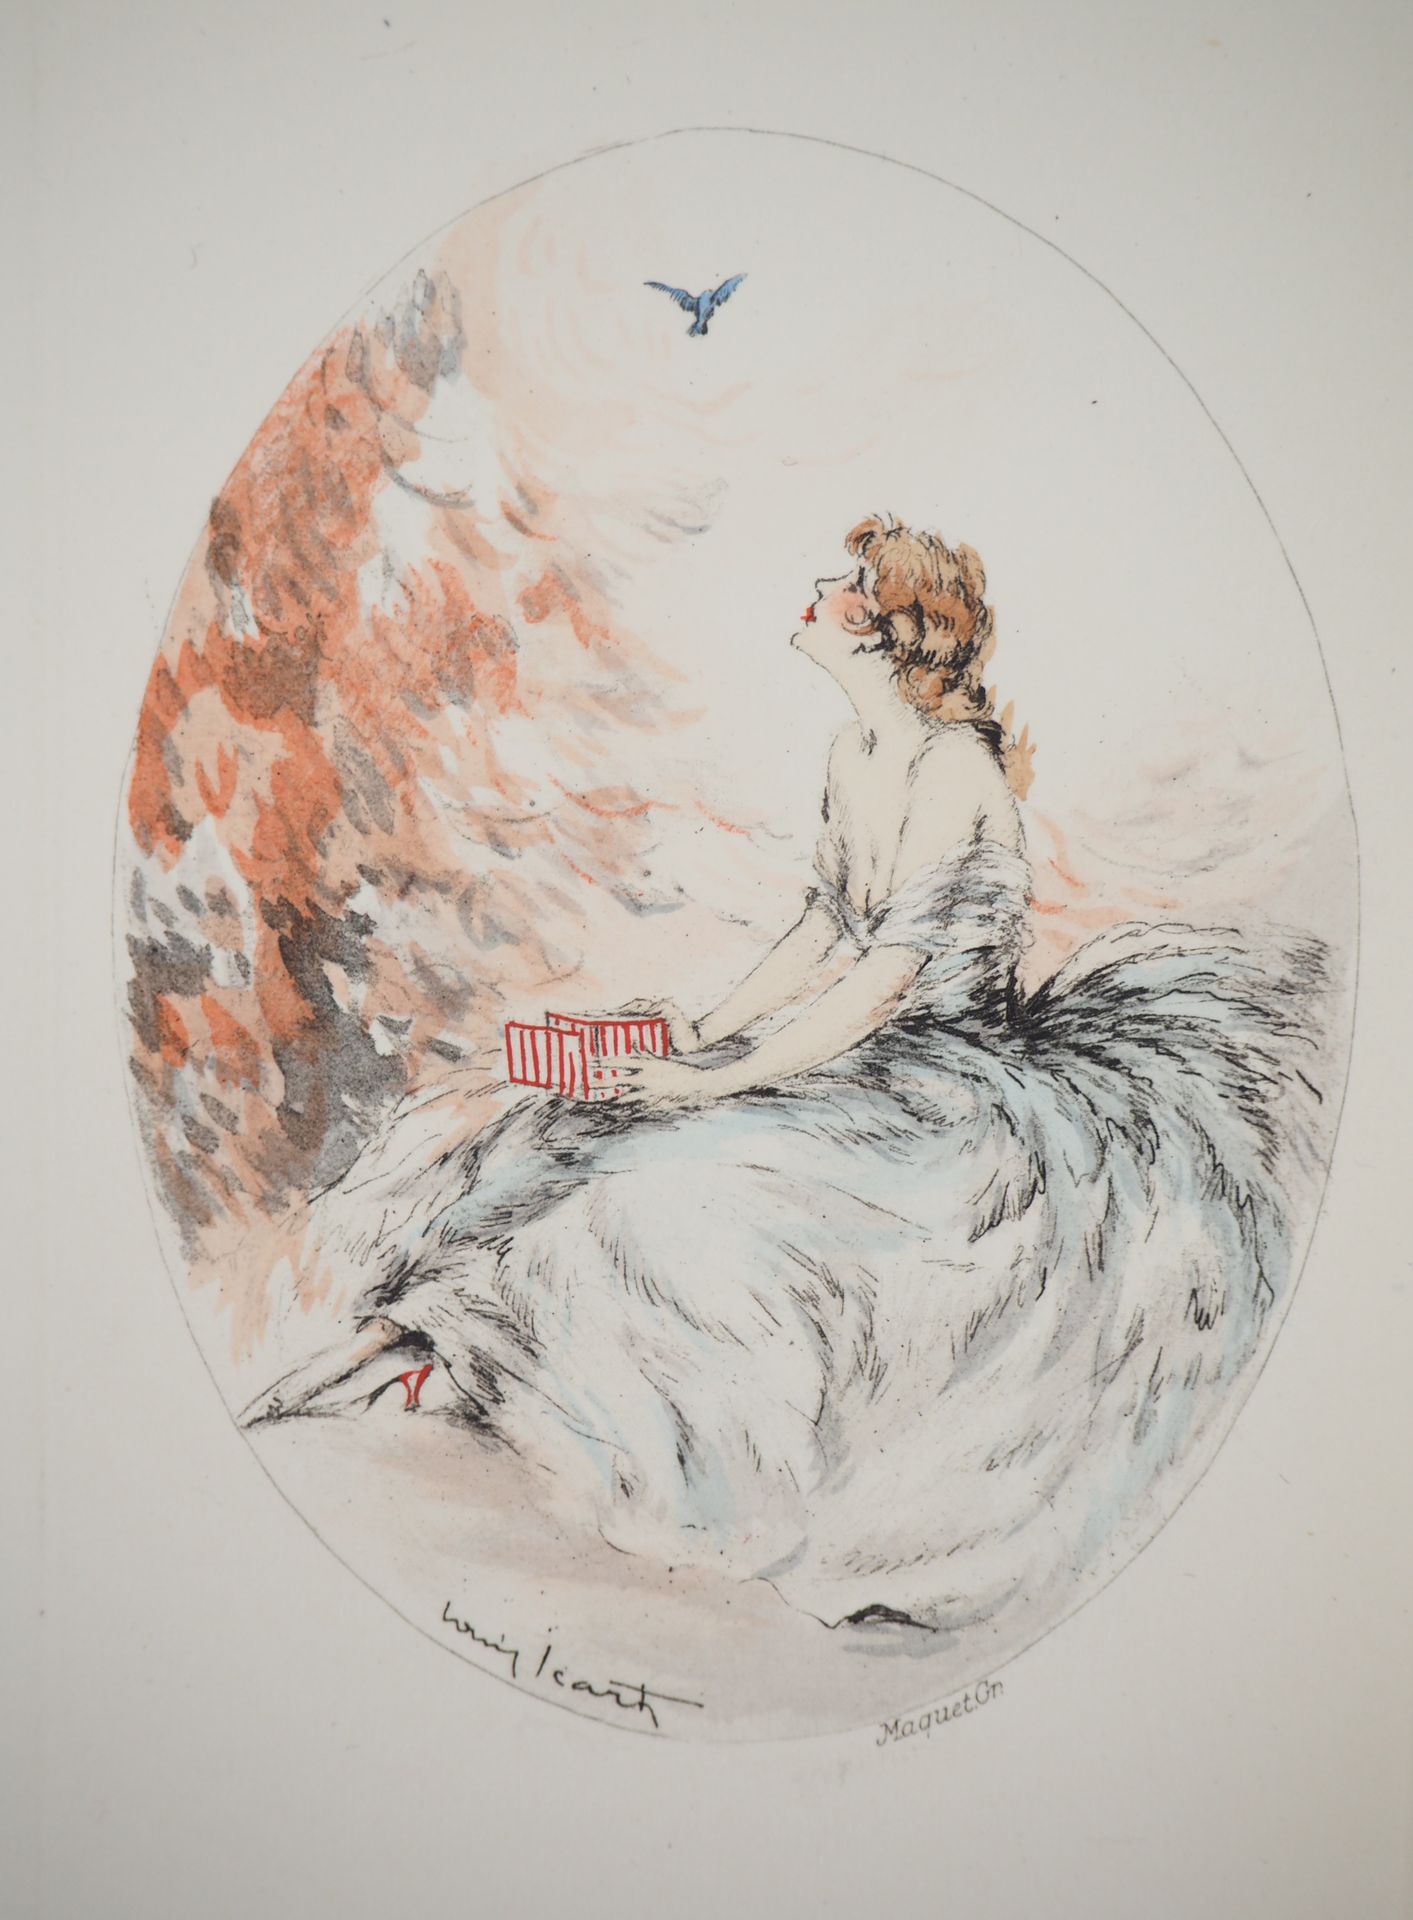 Louis ICART Louis ICART (1888 - 1950)

Young woman and bird released

Original e&hellip;